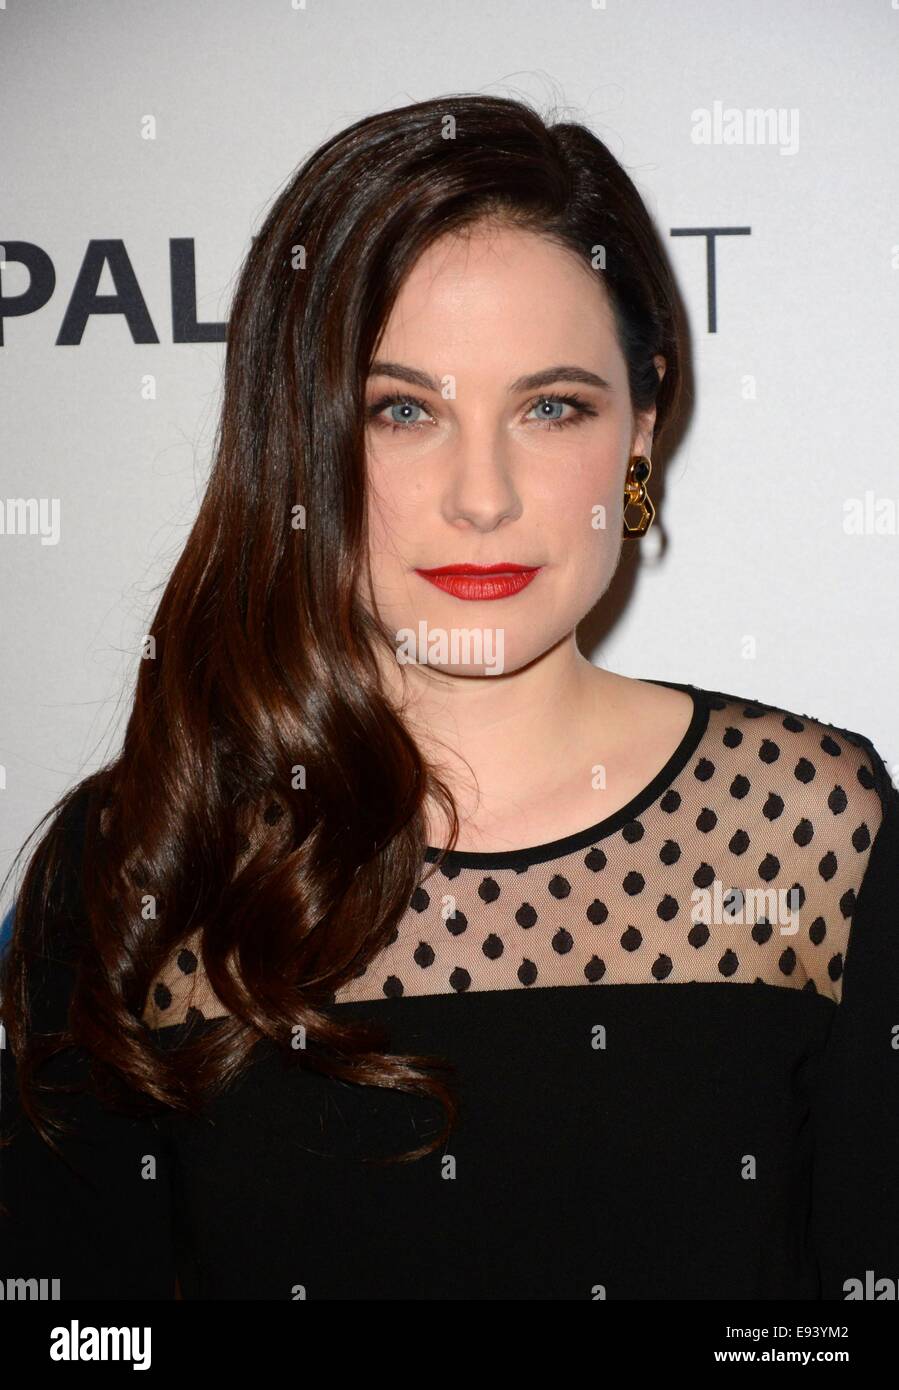 New York, NY, USA. 18th Oct, 2014. Caroline Dhavernas at arrivals for HANNIBAL at 2nd Annual PaleyFest New York TV Fan Festival, The Paley Center for Media, New York, NY October 18, 2014. Credit:  Derek Storm/Everett Collection/Alamy Live News Stock Photo